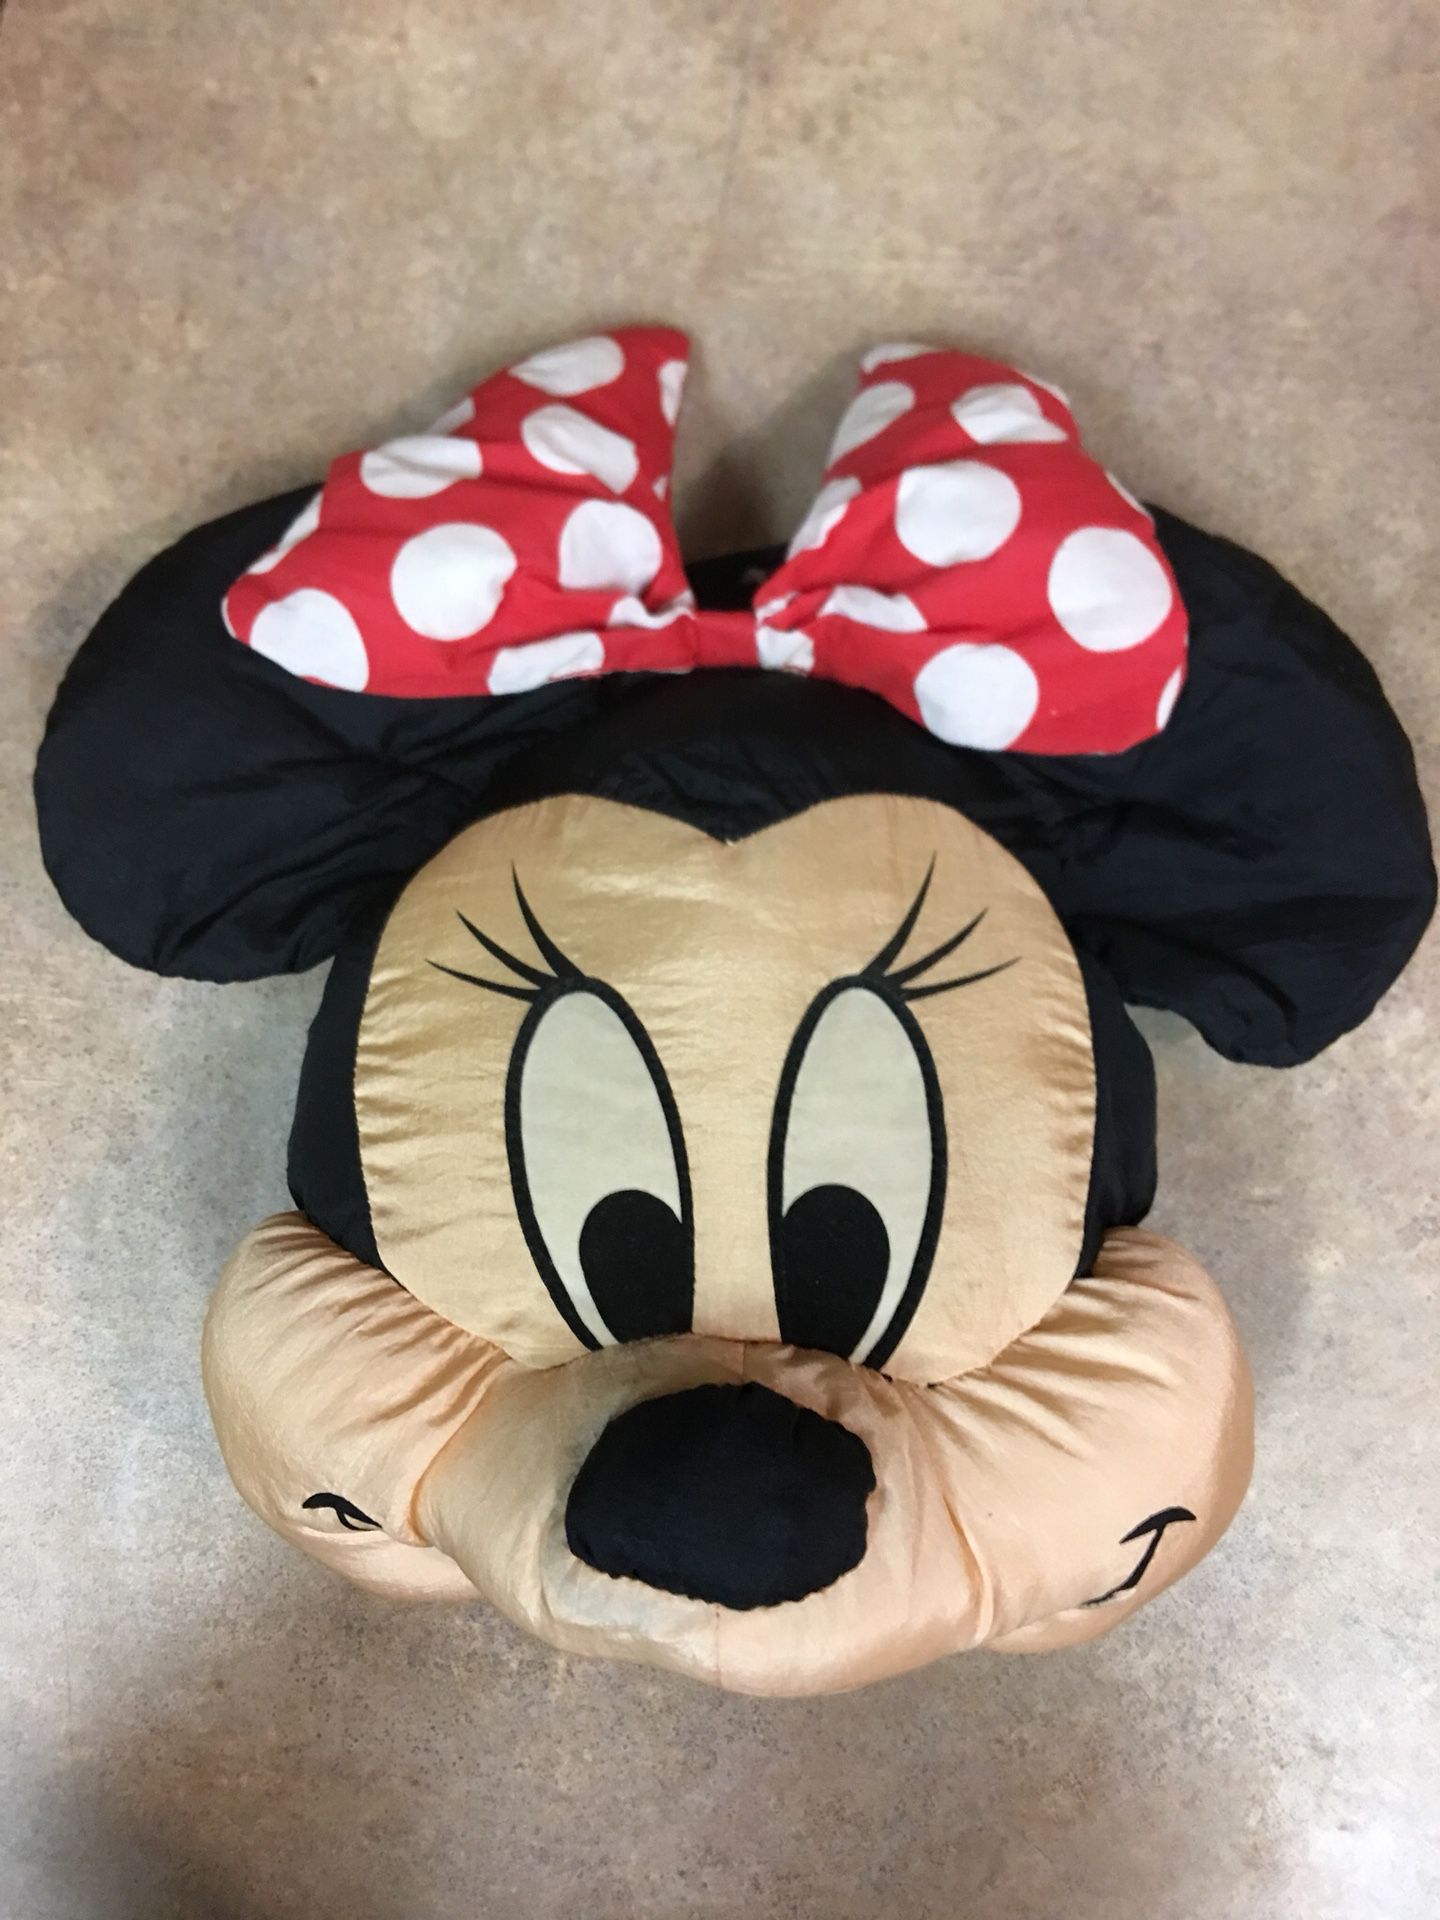 Minnie Mouse onesie and decorator pillow set $12